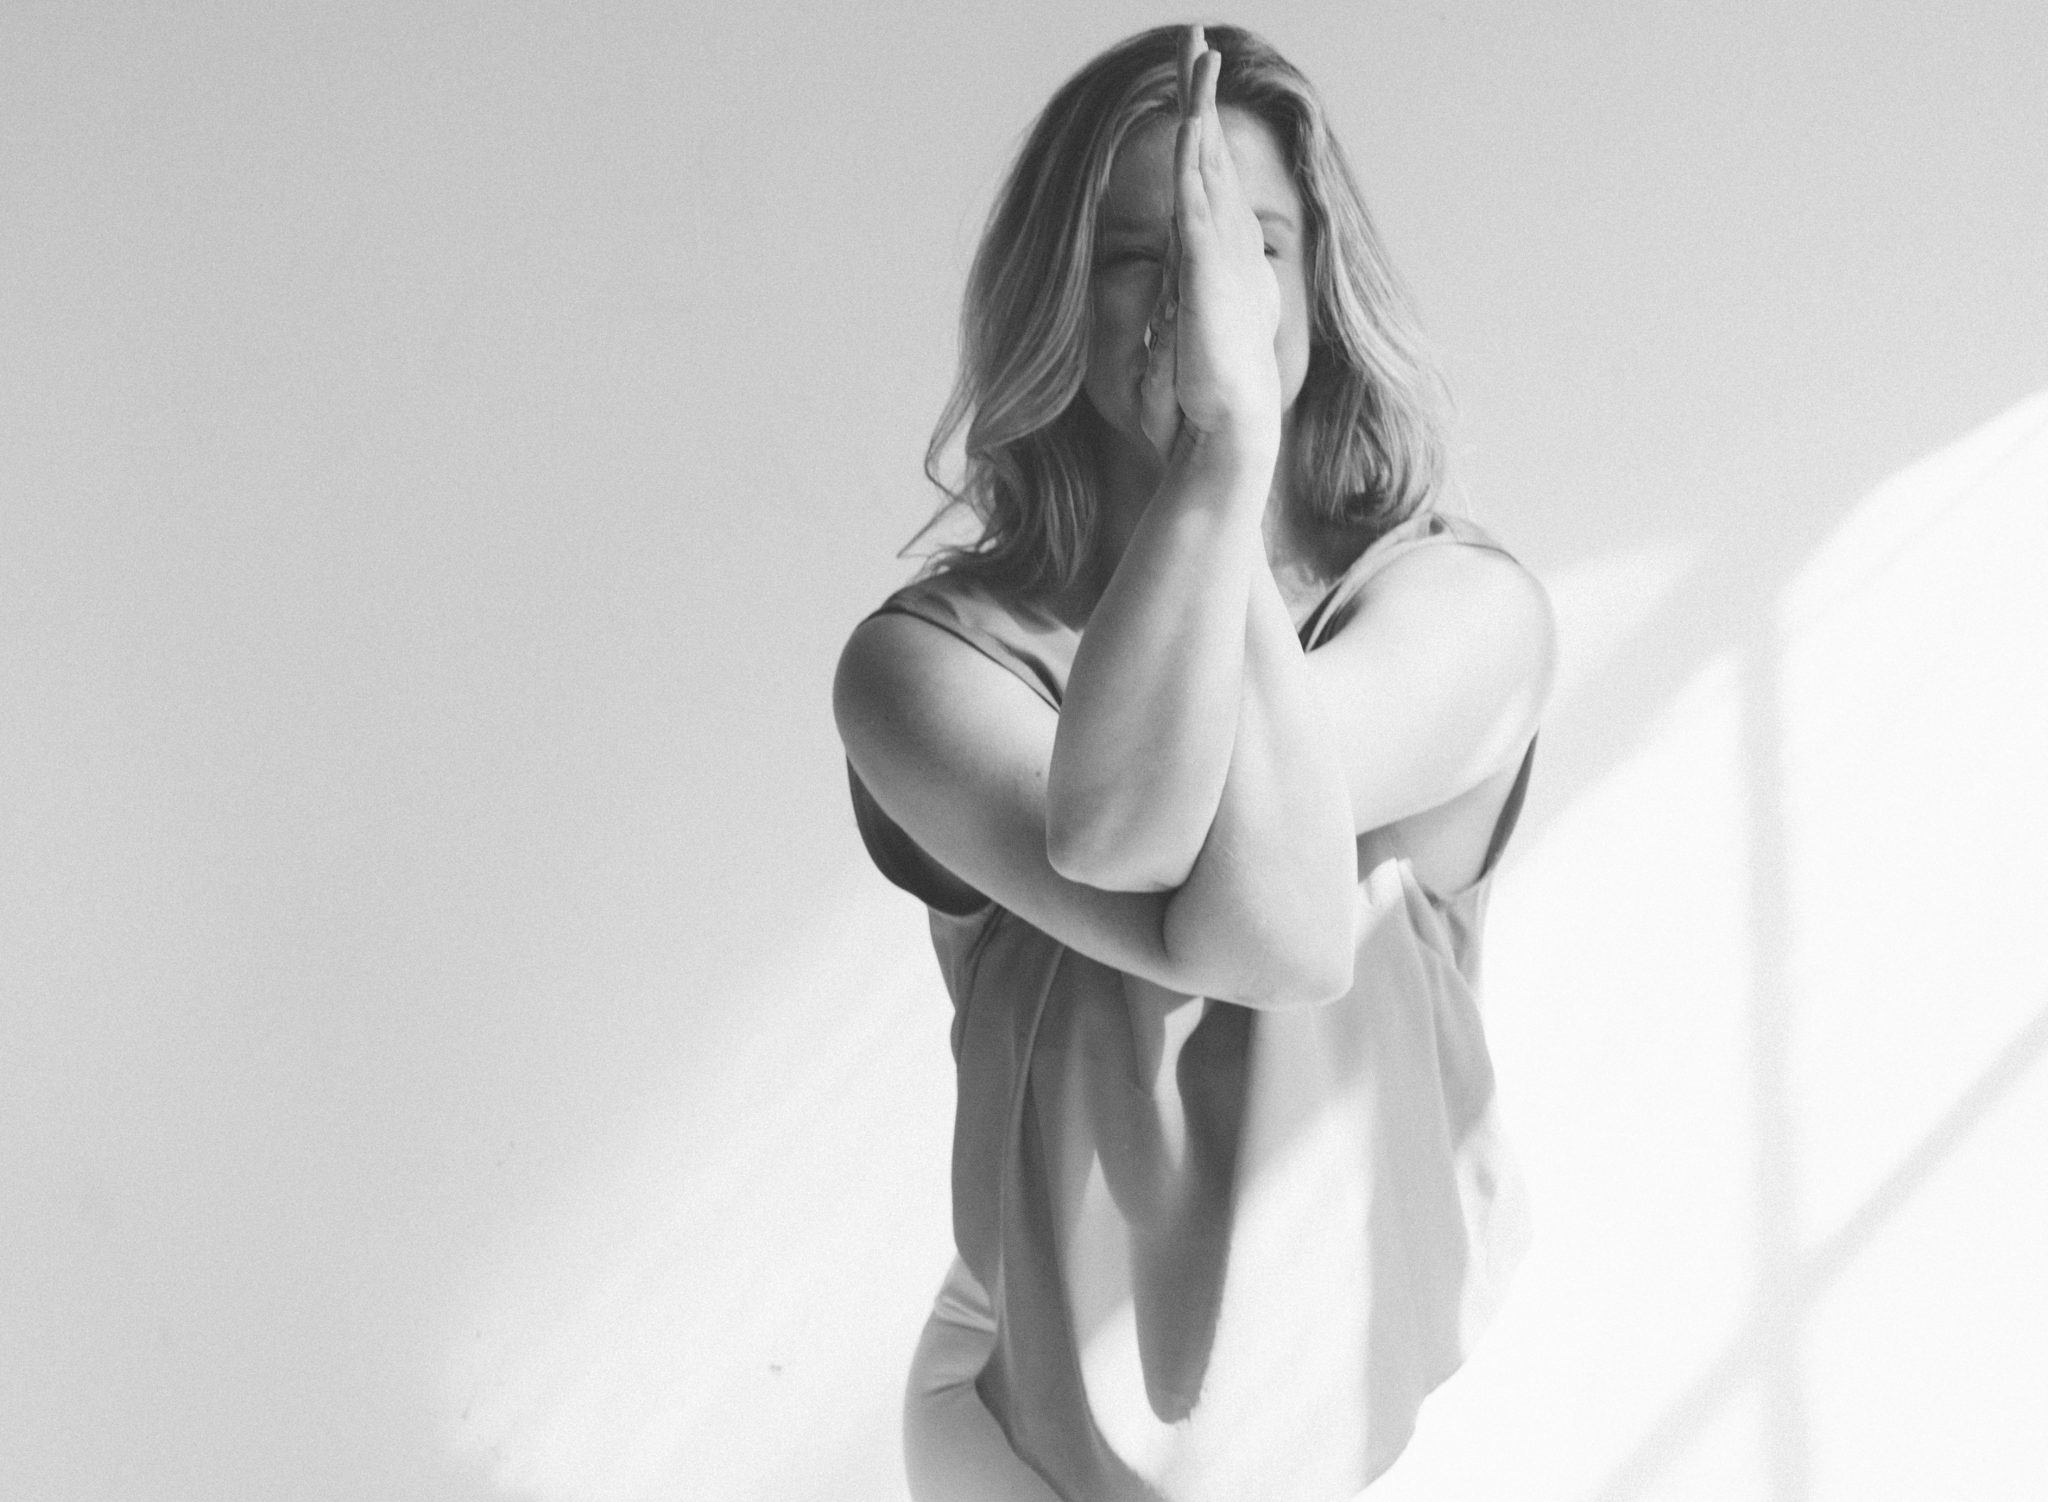 b+w photo of woman doing yoga with arms crossed which cover her face